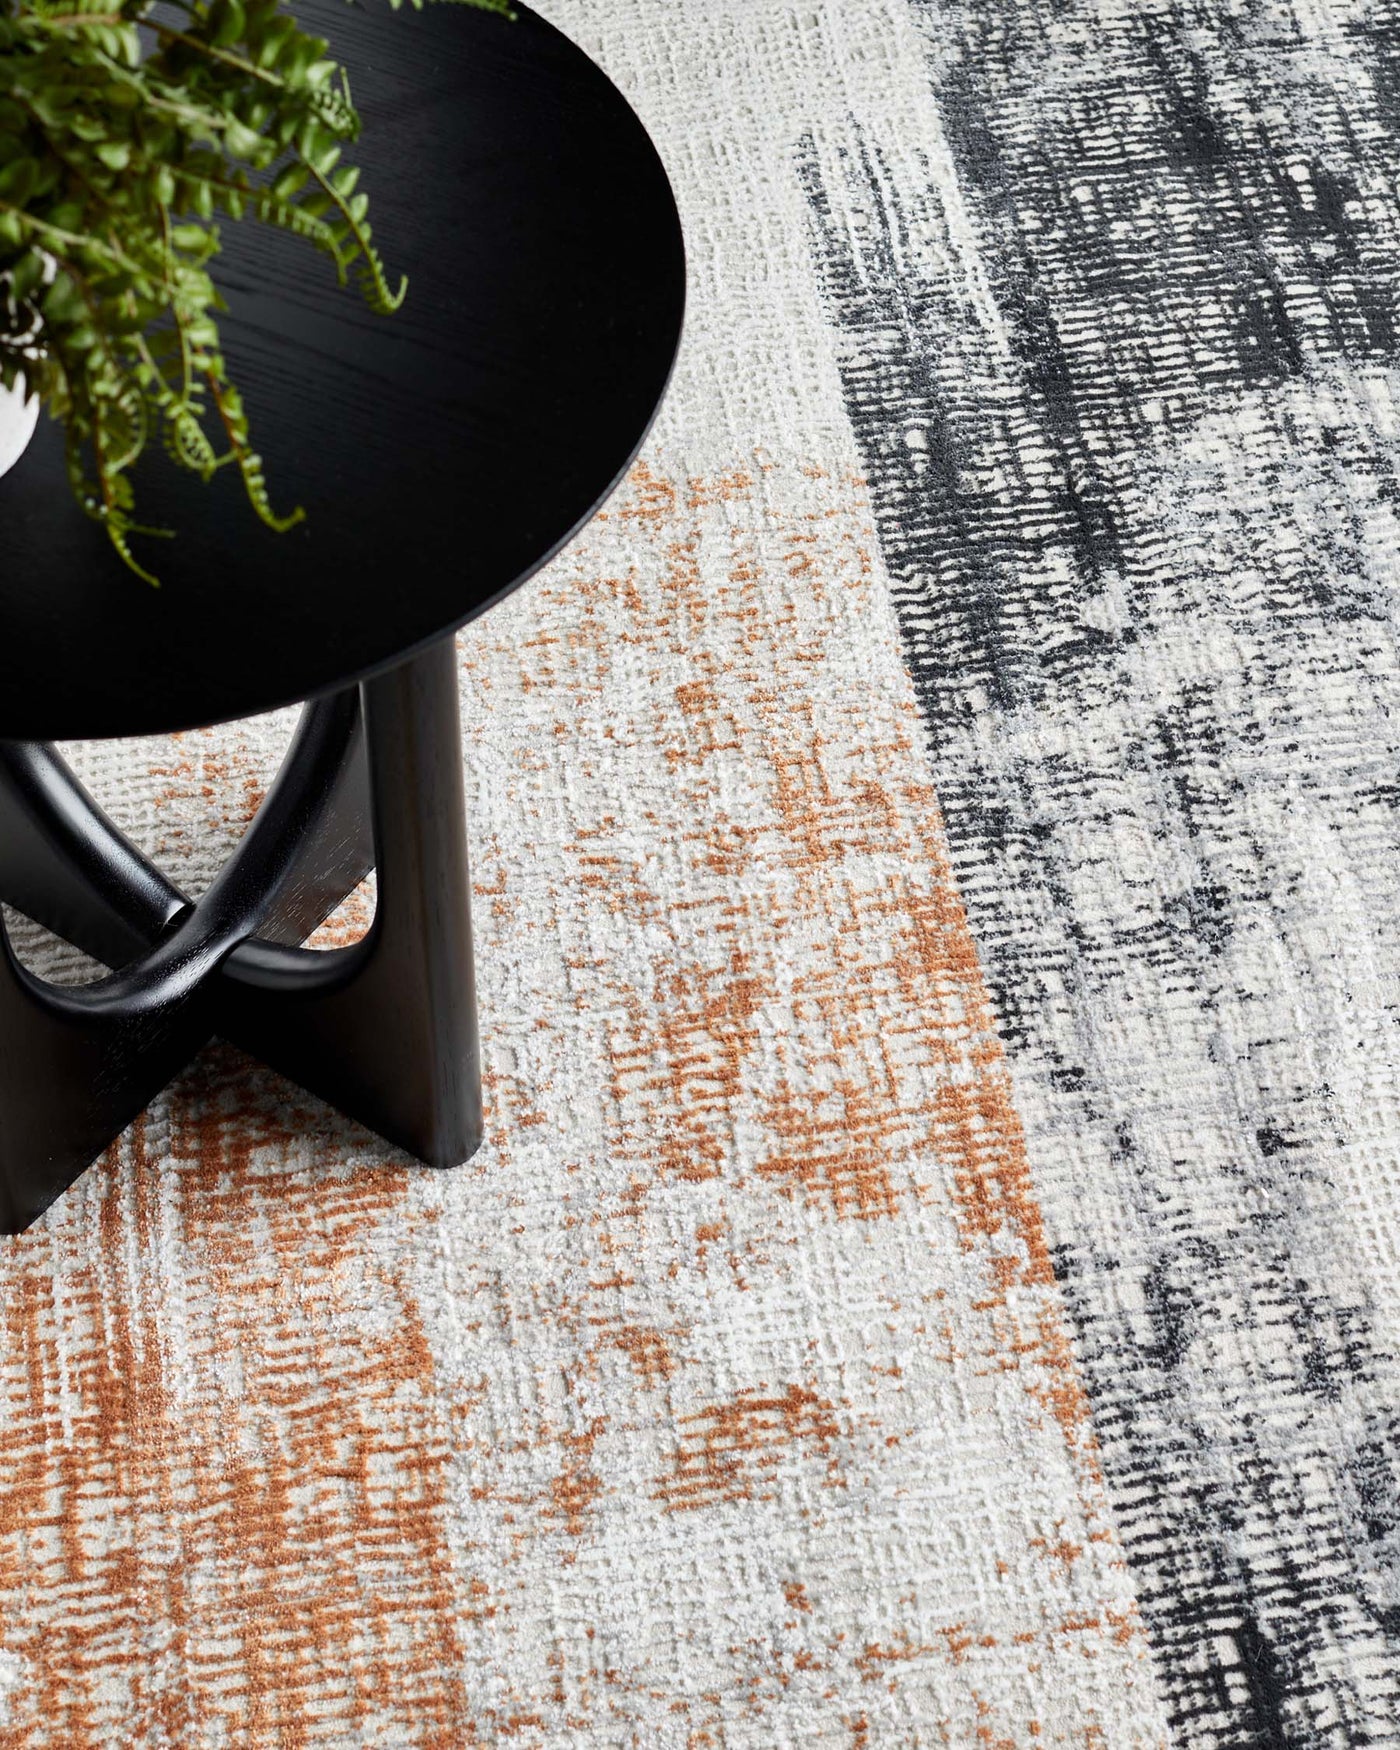 A modern, round, black three-legged side table with a sleek surface, partially covered by a potted fern plant, standing on a contemporary textured area rug with an abstract design in shades of orange, beige, and grey.